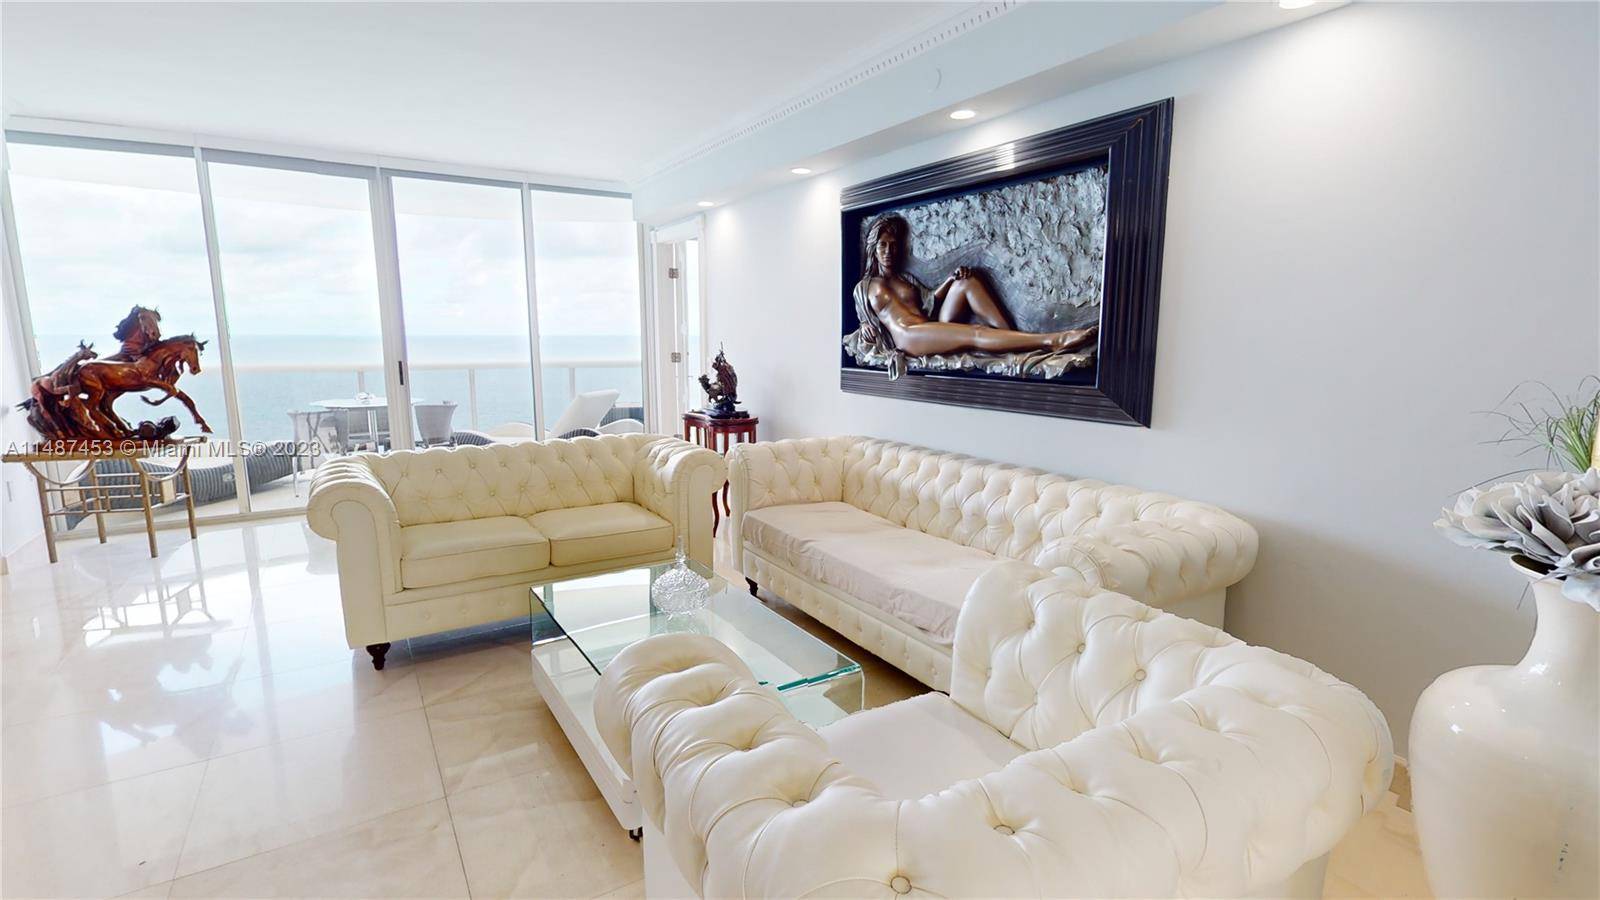 This direct ocean 3 Bedrooms 3 Bathrooms condo boasts a spacious interior with a modern touch.